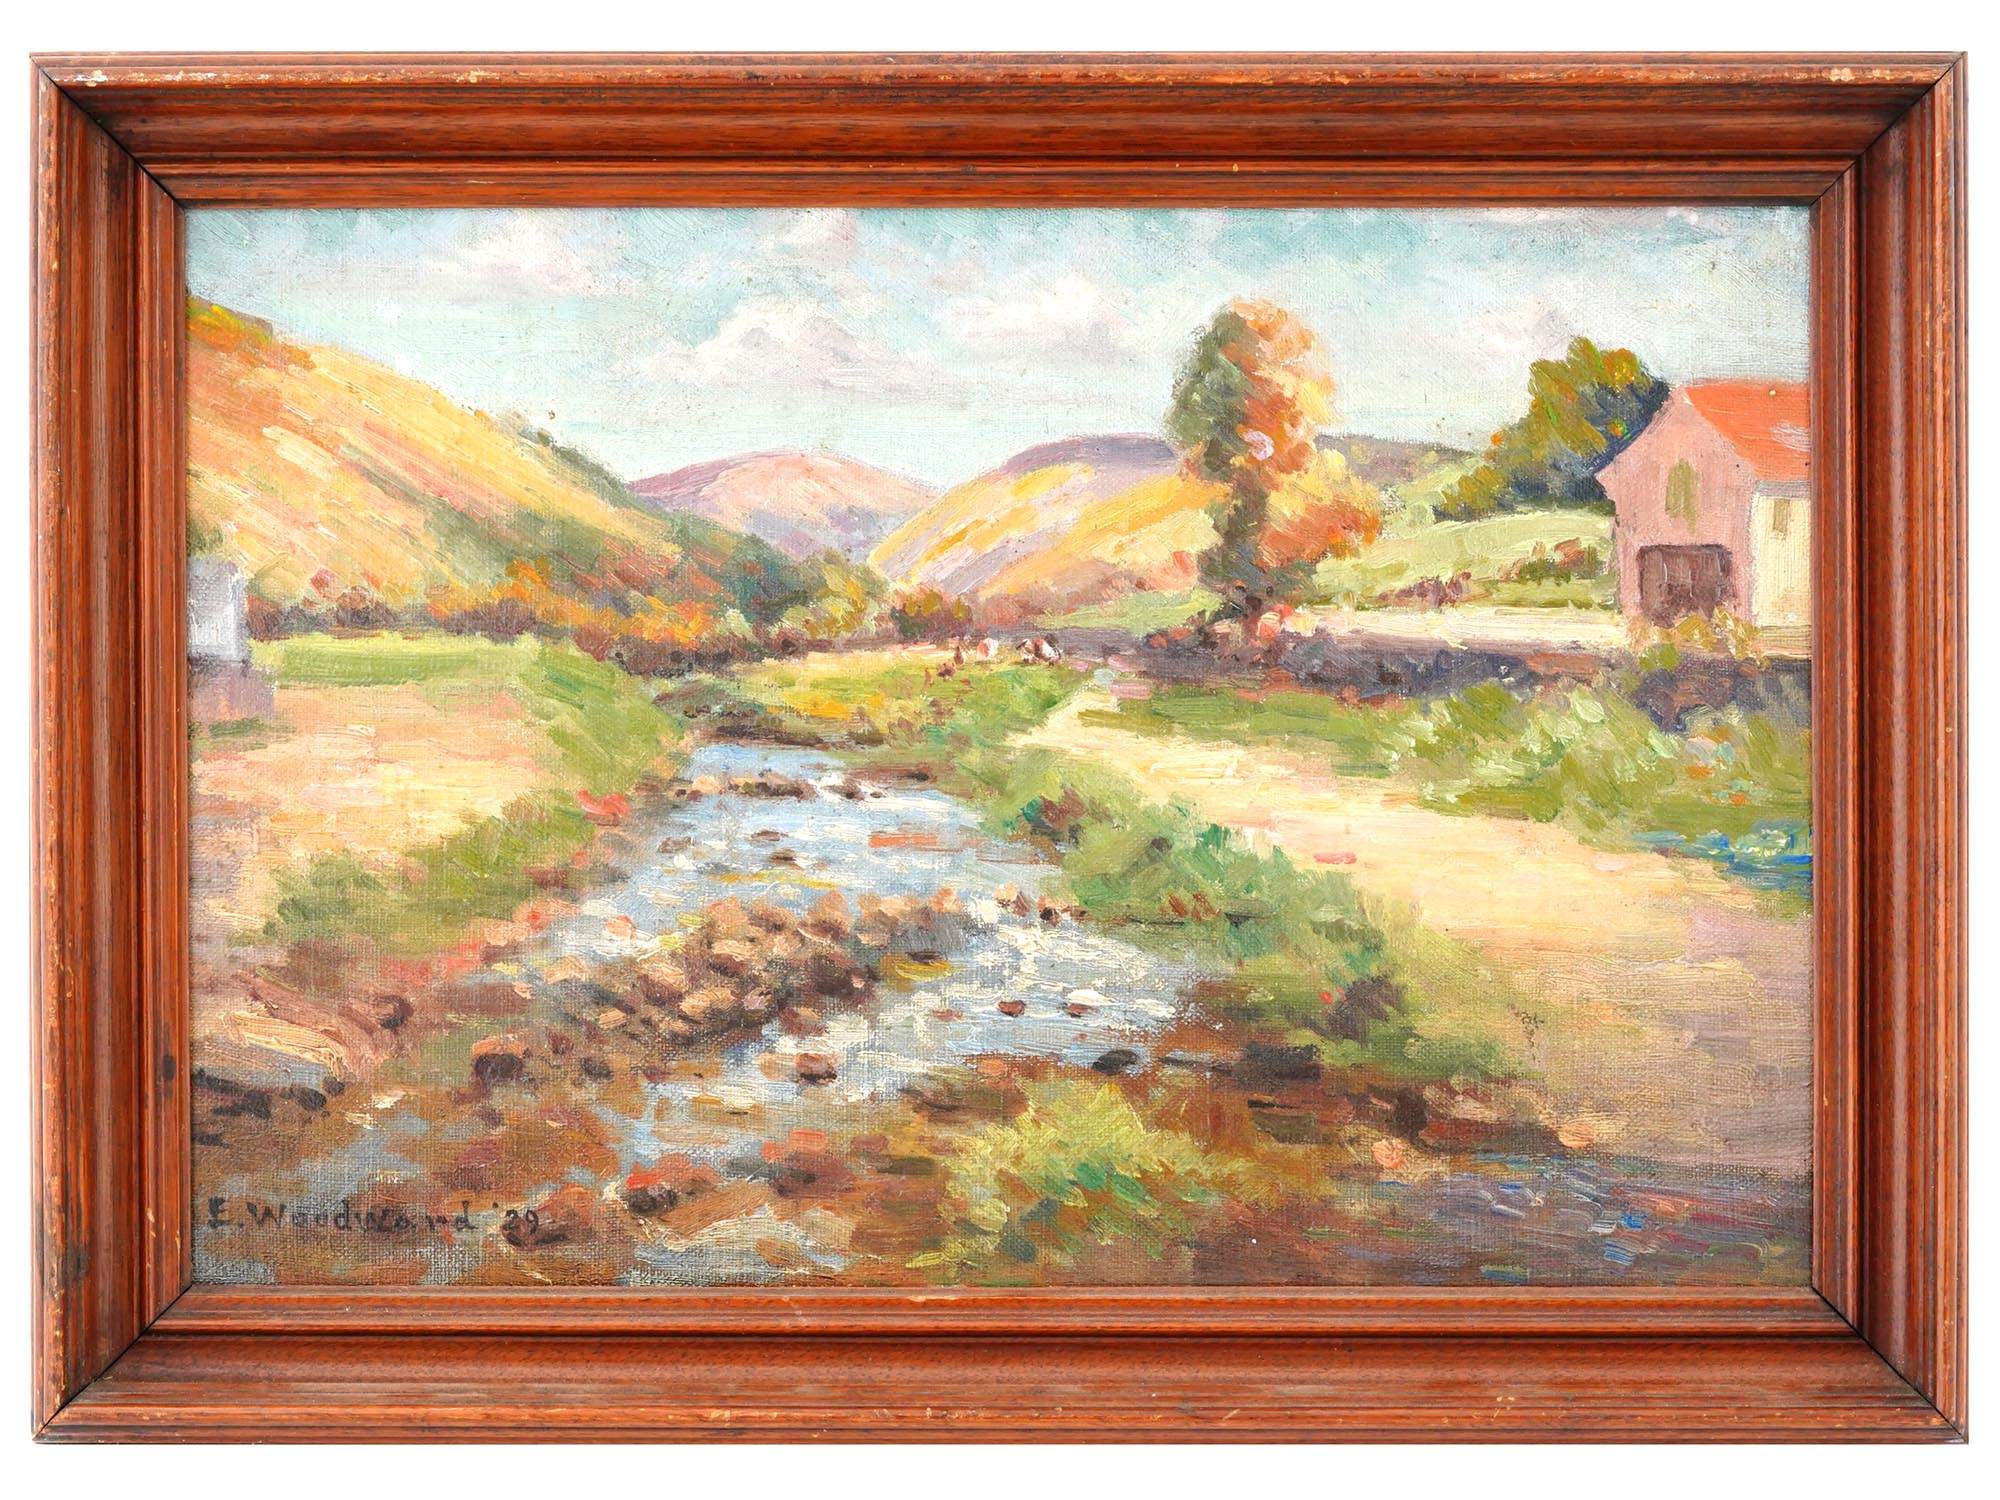 AMERICAN LANDSCAPE OIL PAINTING BY ELLSWORTH WOODWARD PIC-0